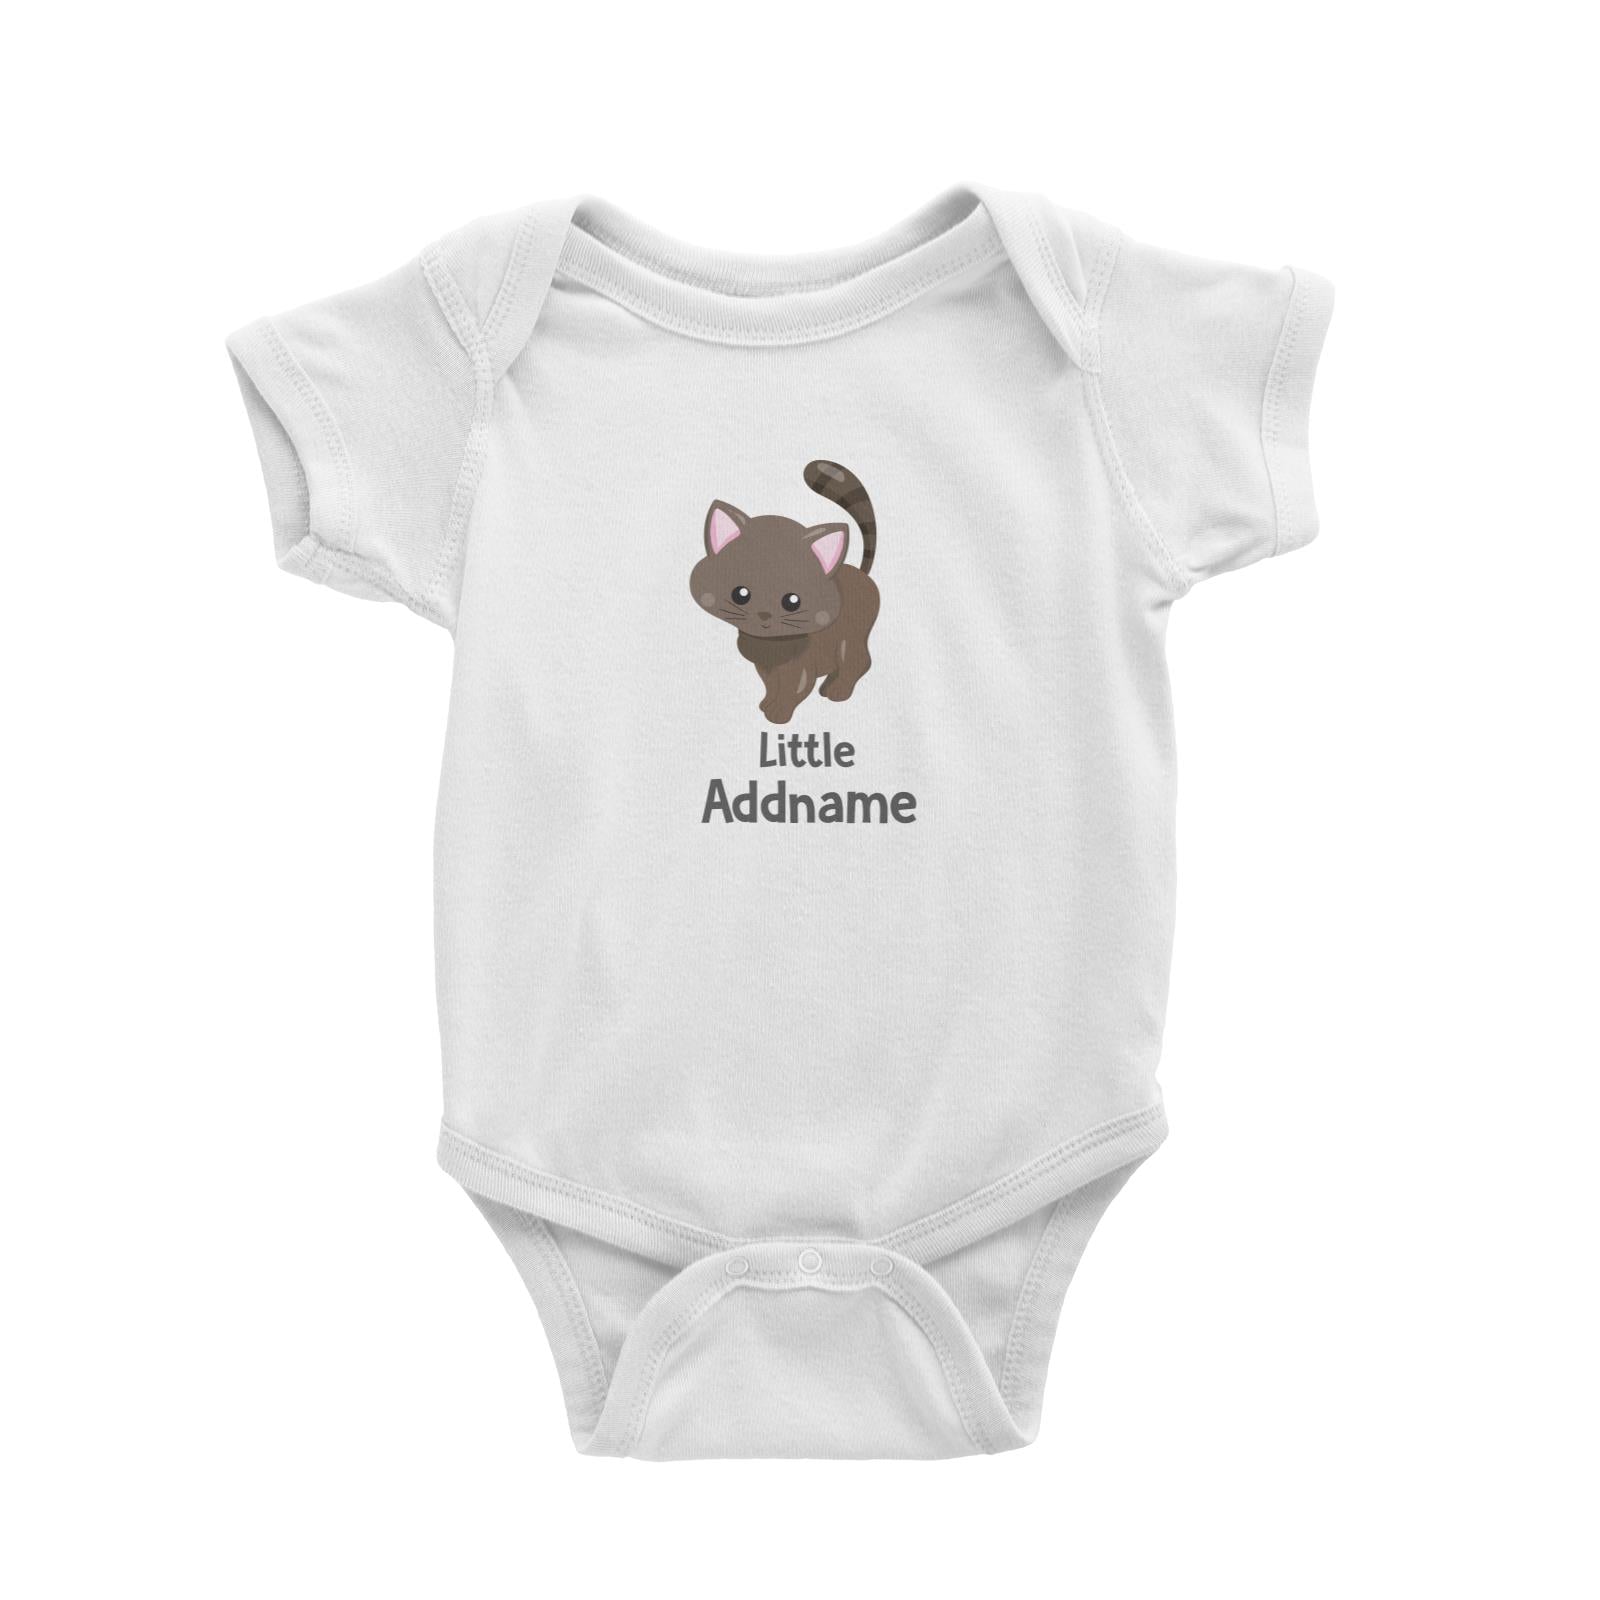 Adorable Cats Dark Brown Cat Little Addname White Baby Romper